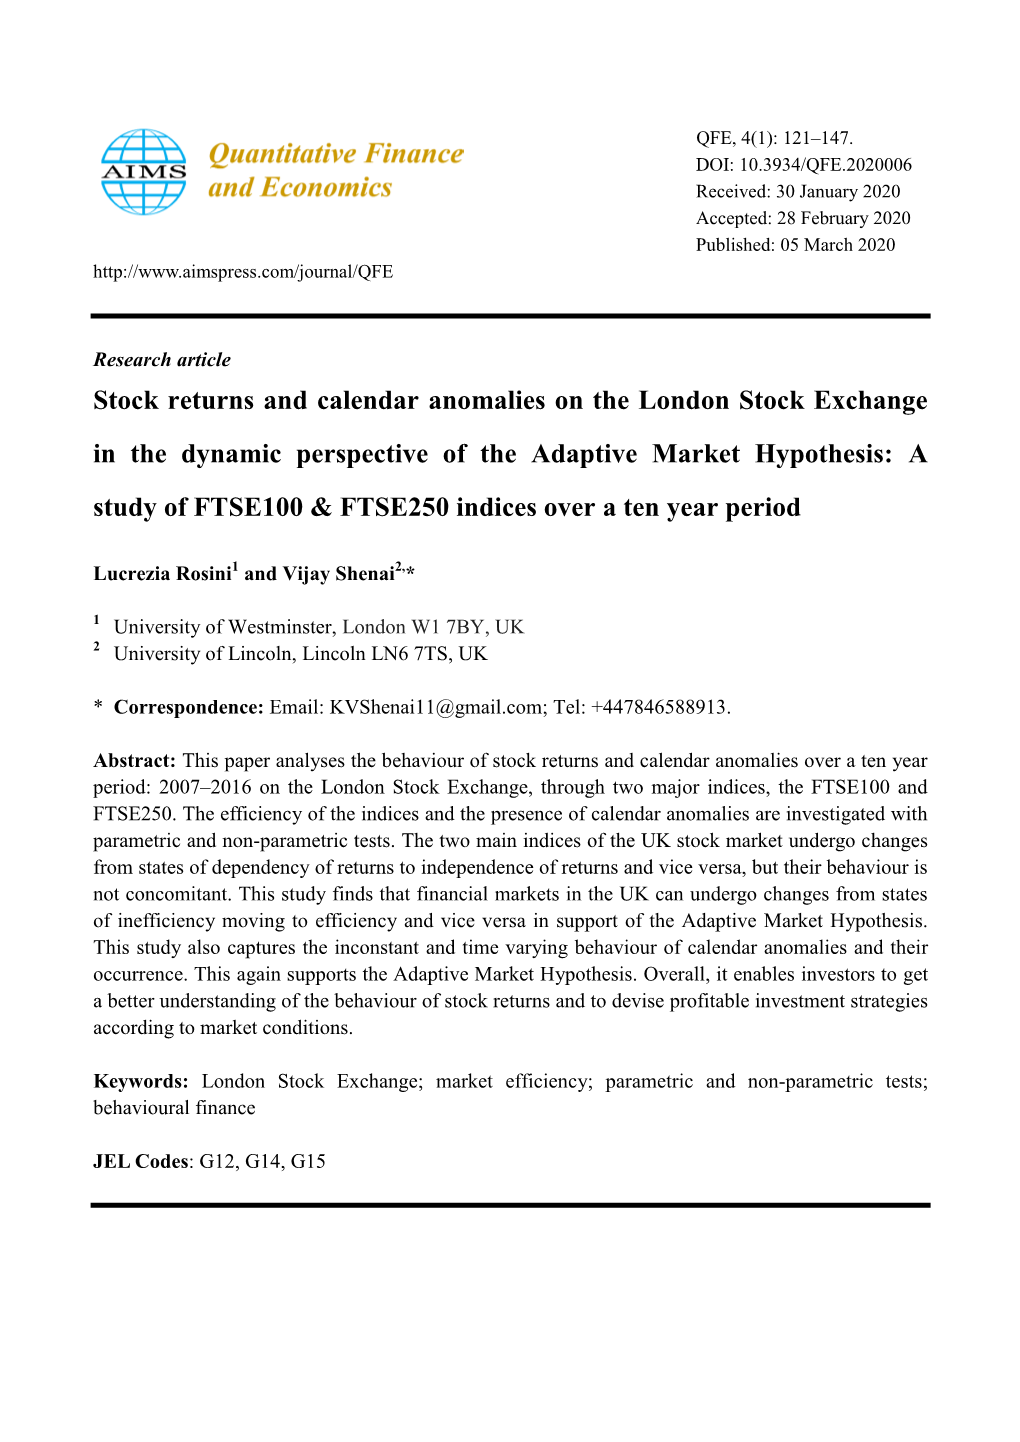 Stock Returns and Calendar Anomalies on the London Stock